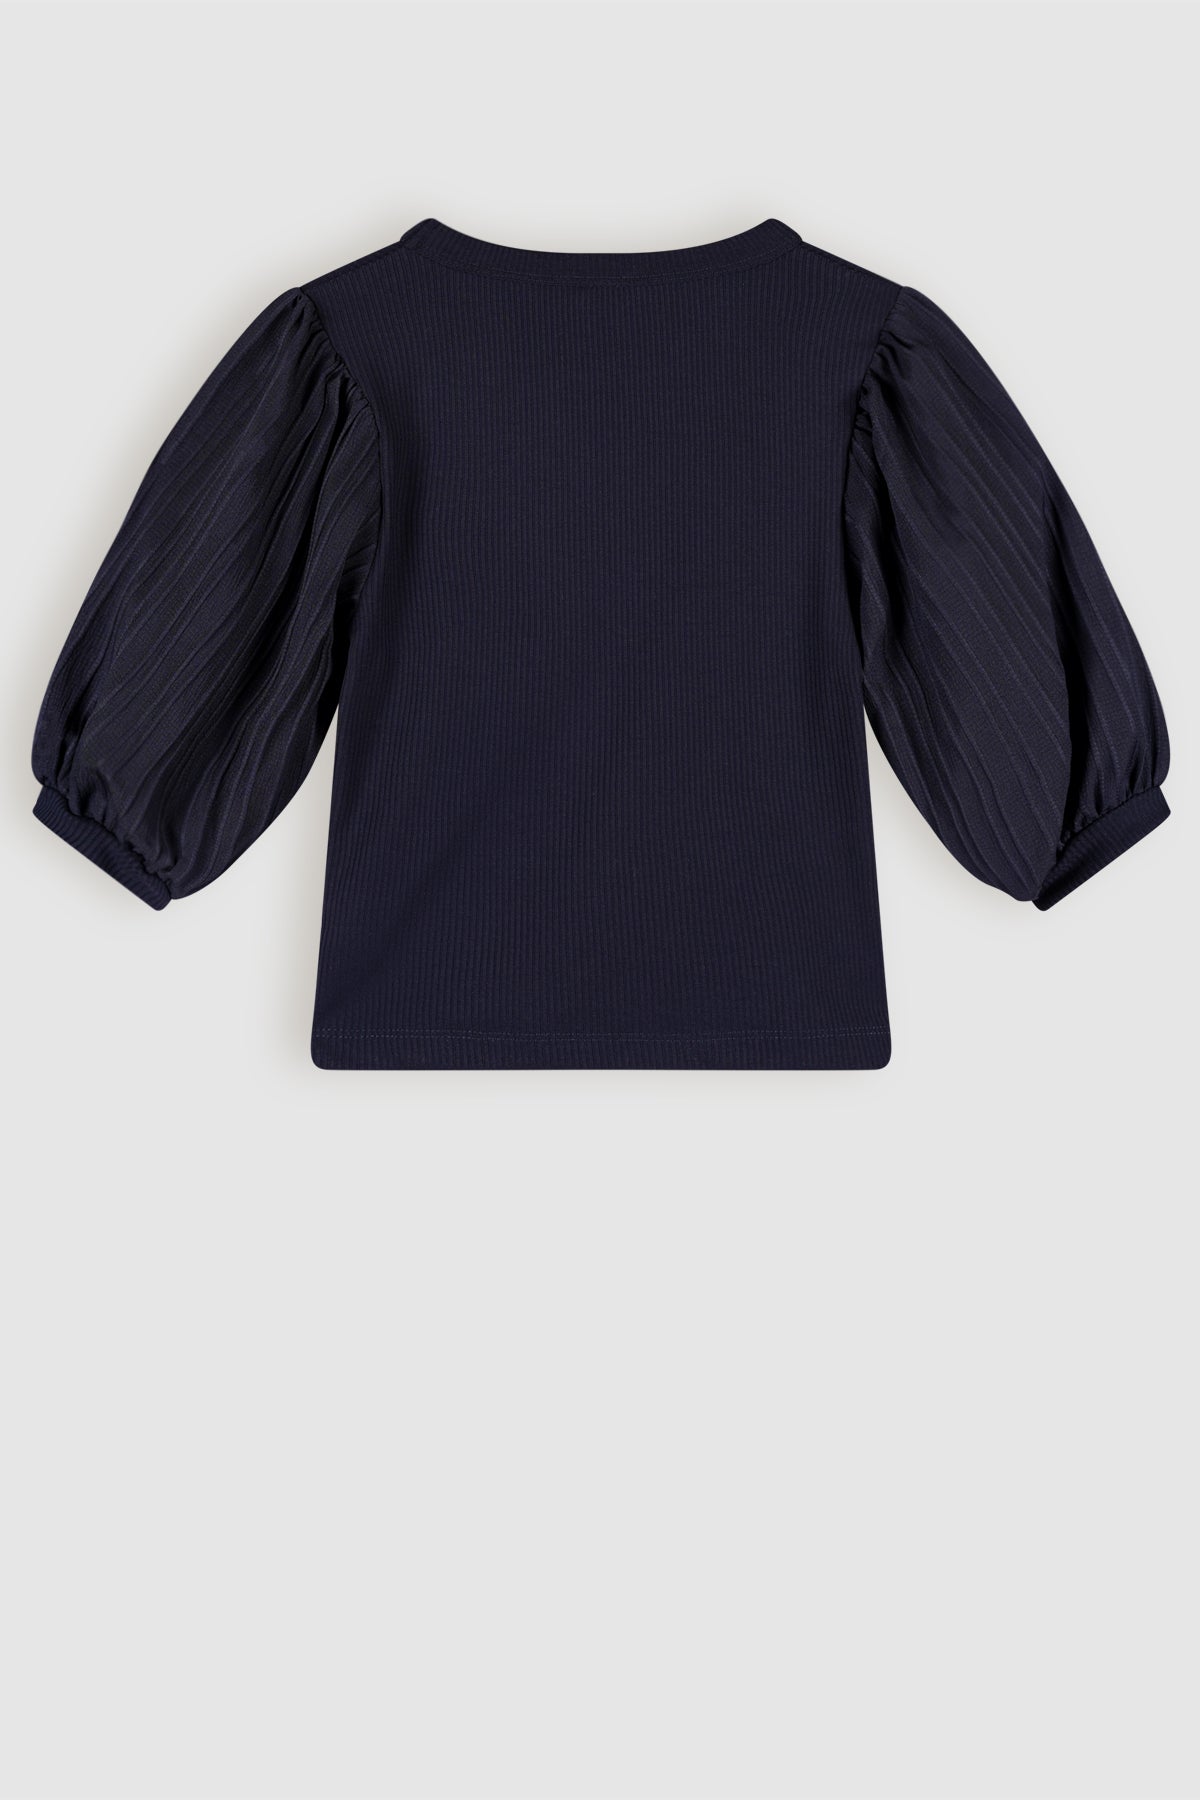 Kylia Cropped Top Navy